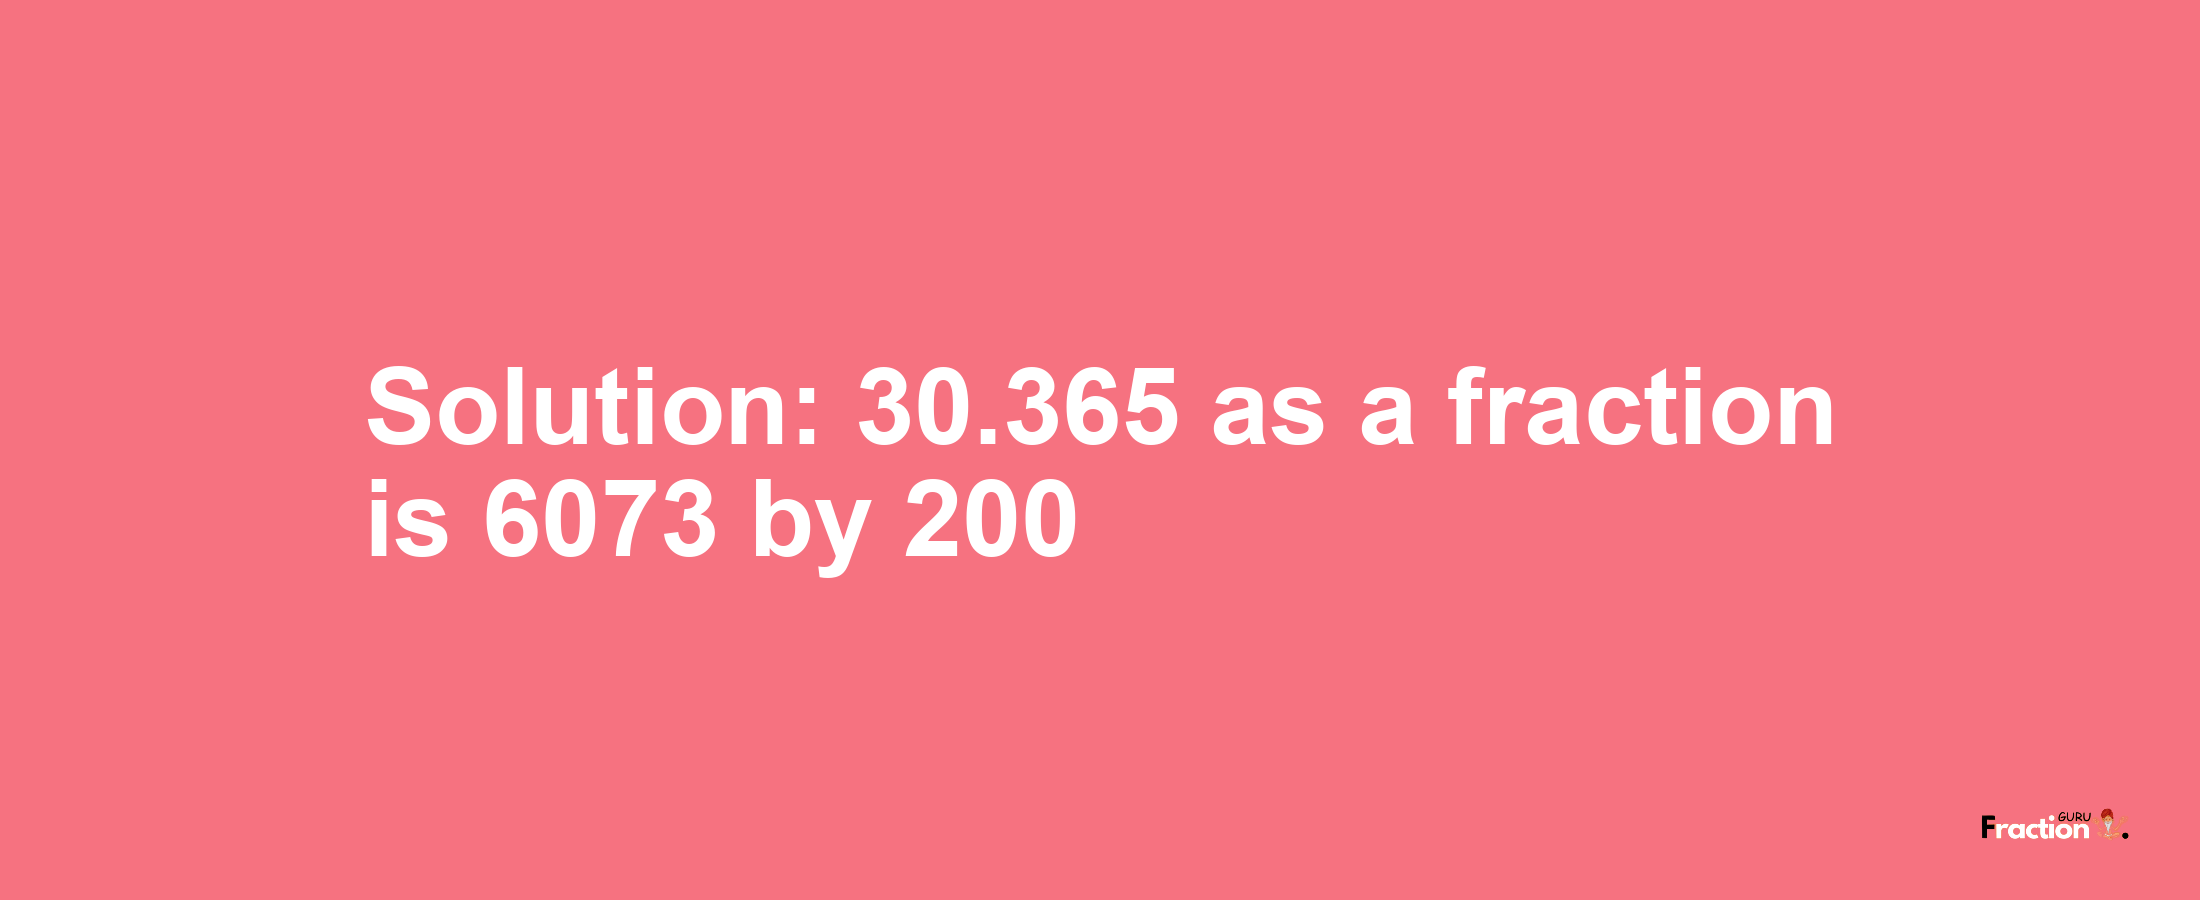 Solution:30.365 as a fraction is 6073/200